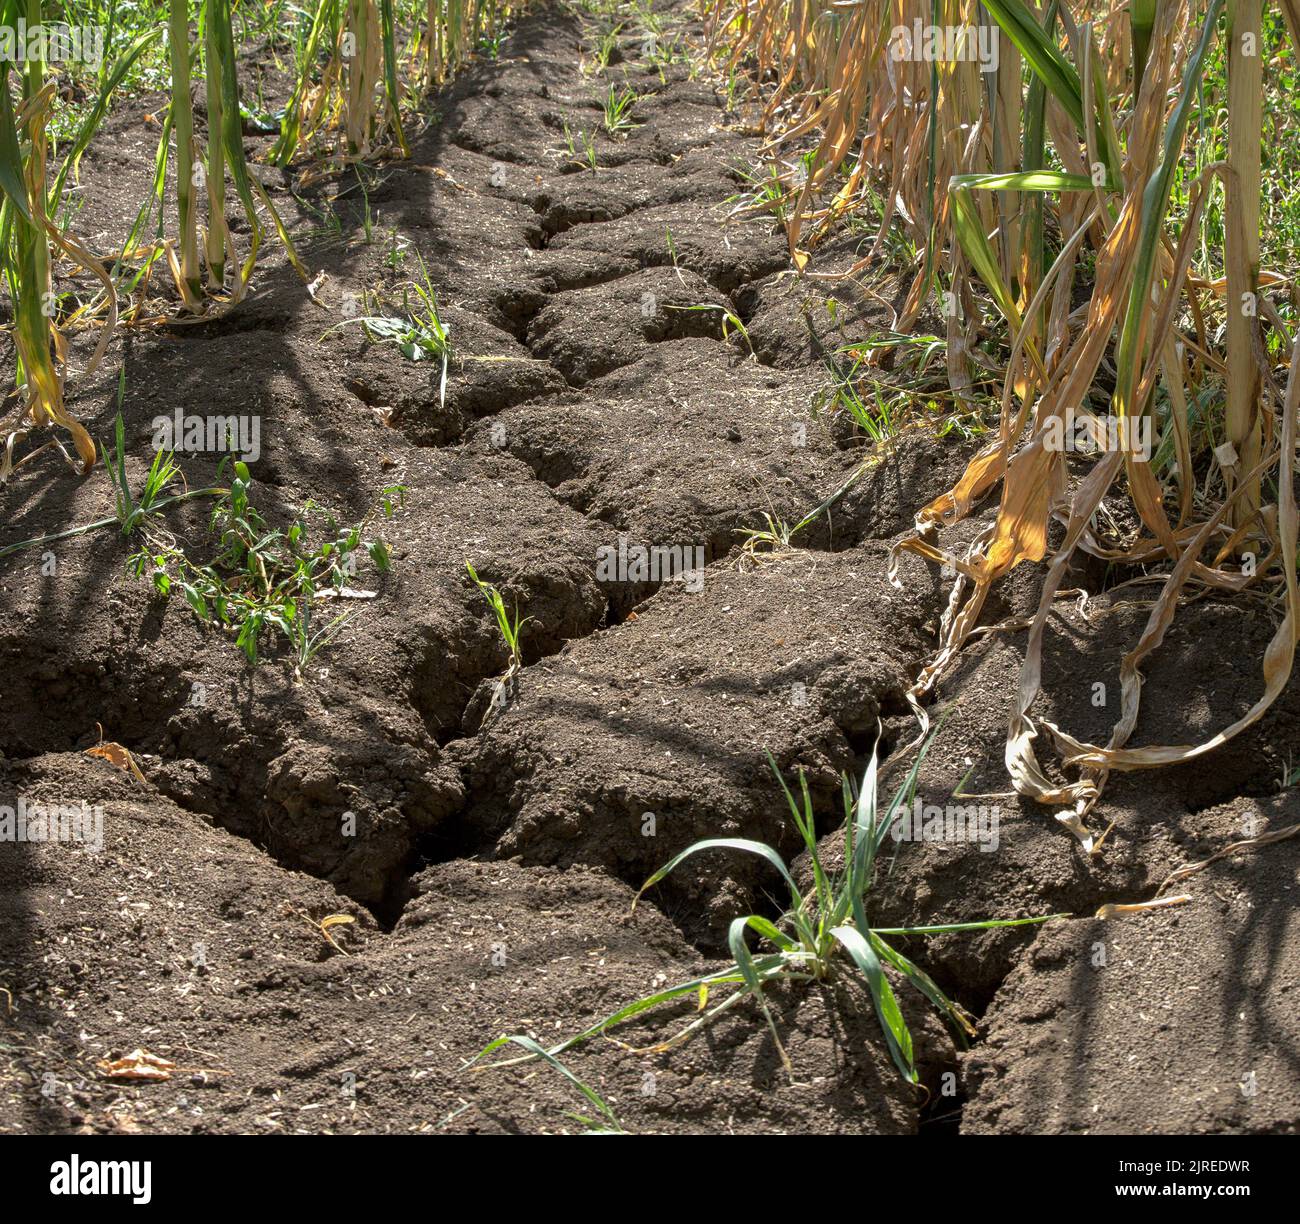 Inside view of a maize field in Germany. Due to the persistent drought, the farmland has dried up and deep cracks have formed. The plants are now dryi Stock Photo